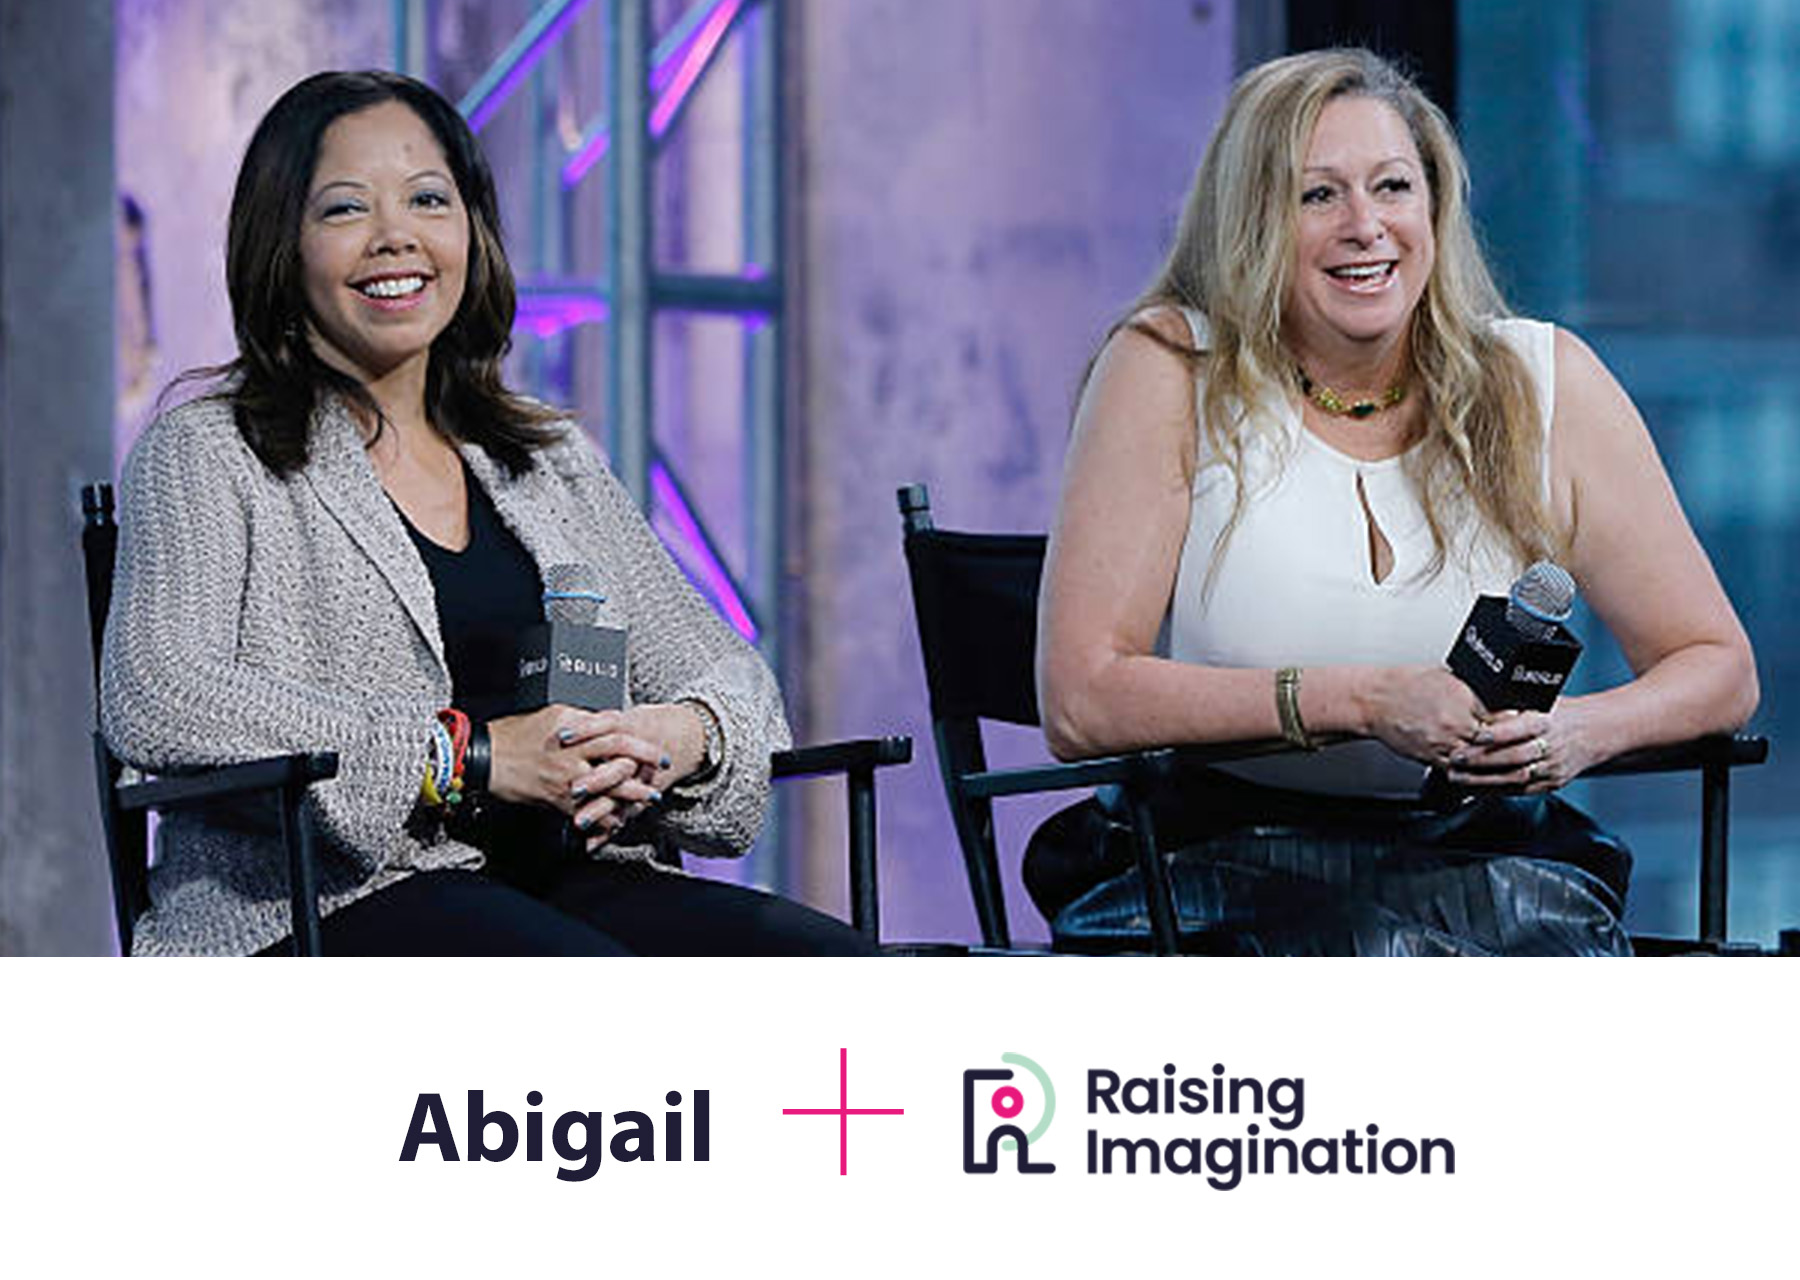 Castles Aren’t Equally Distributed: Imagining with Abigail Disney